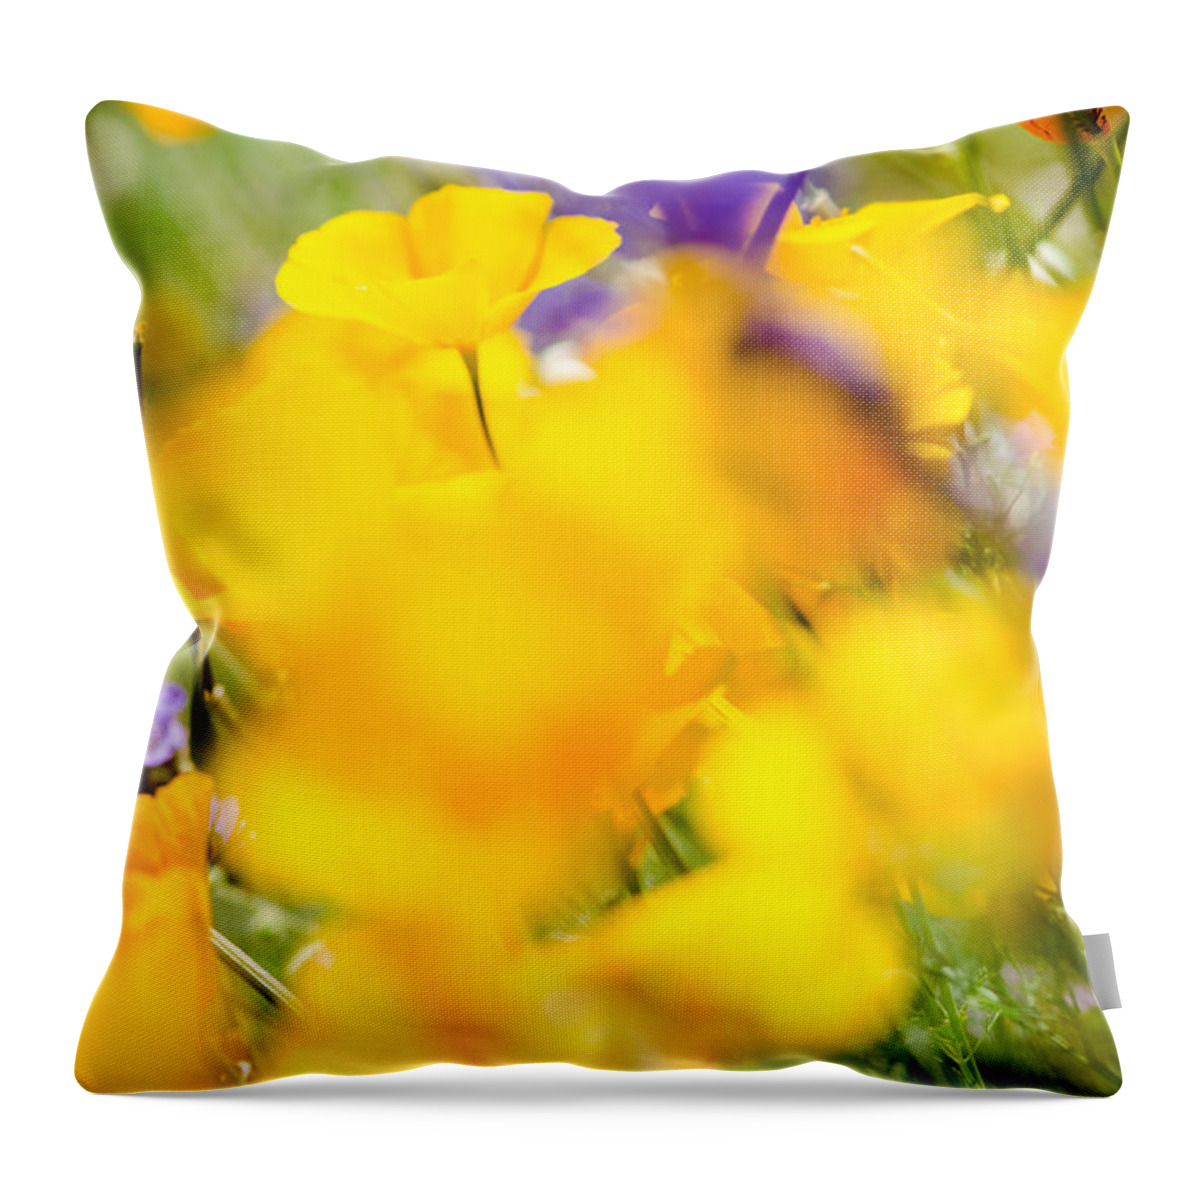 Flower Throw Pillow featuring the photograph Middle Of The Crowd by Tamara Becker